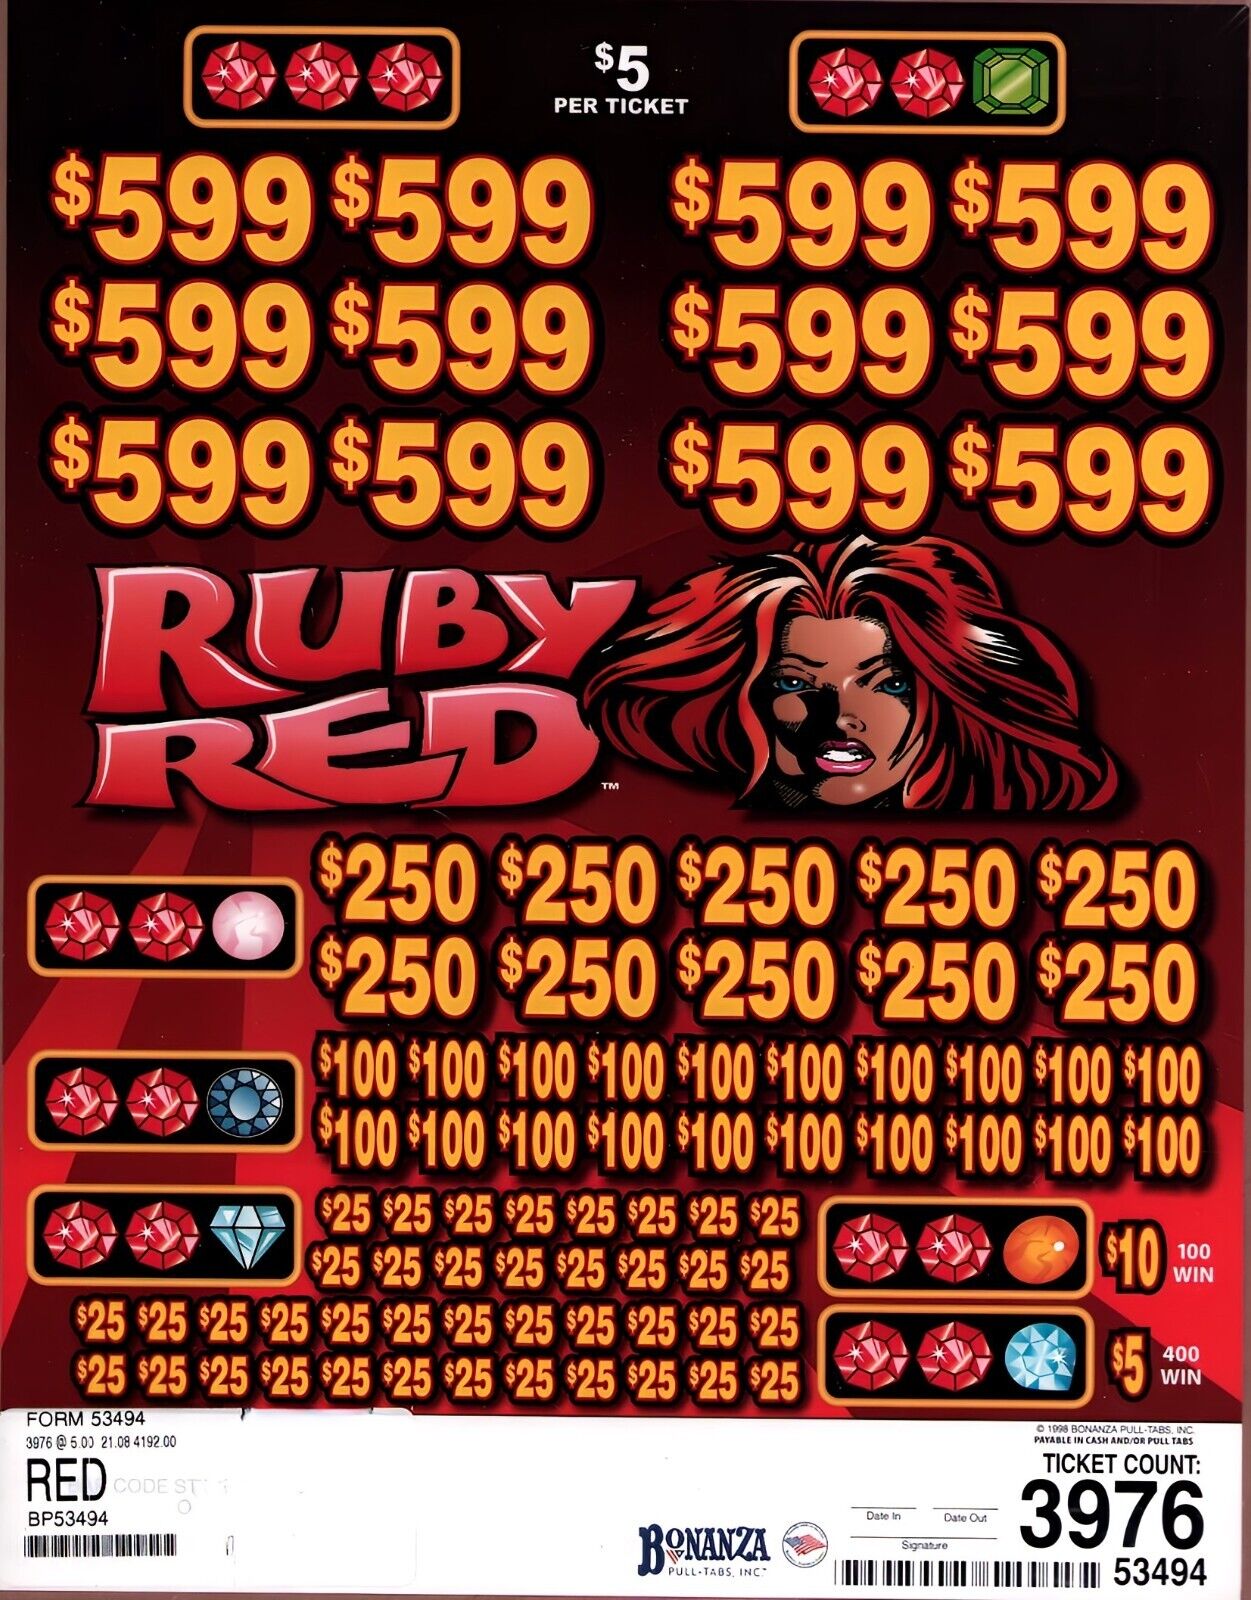 5 Window Pull Tab Tickets Game - Ruby Red $5